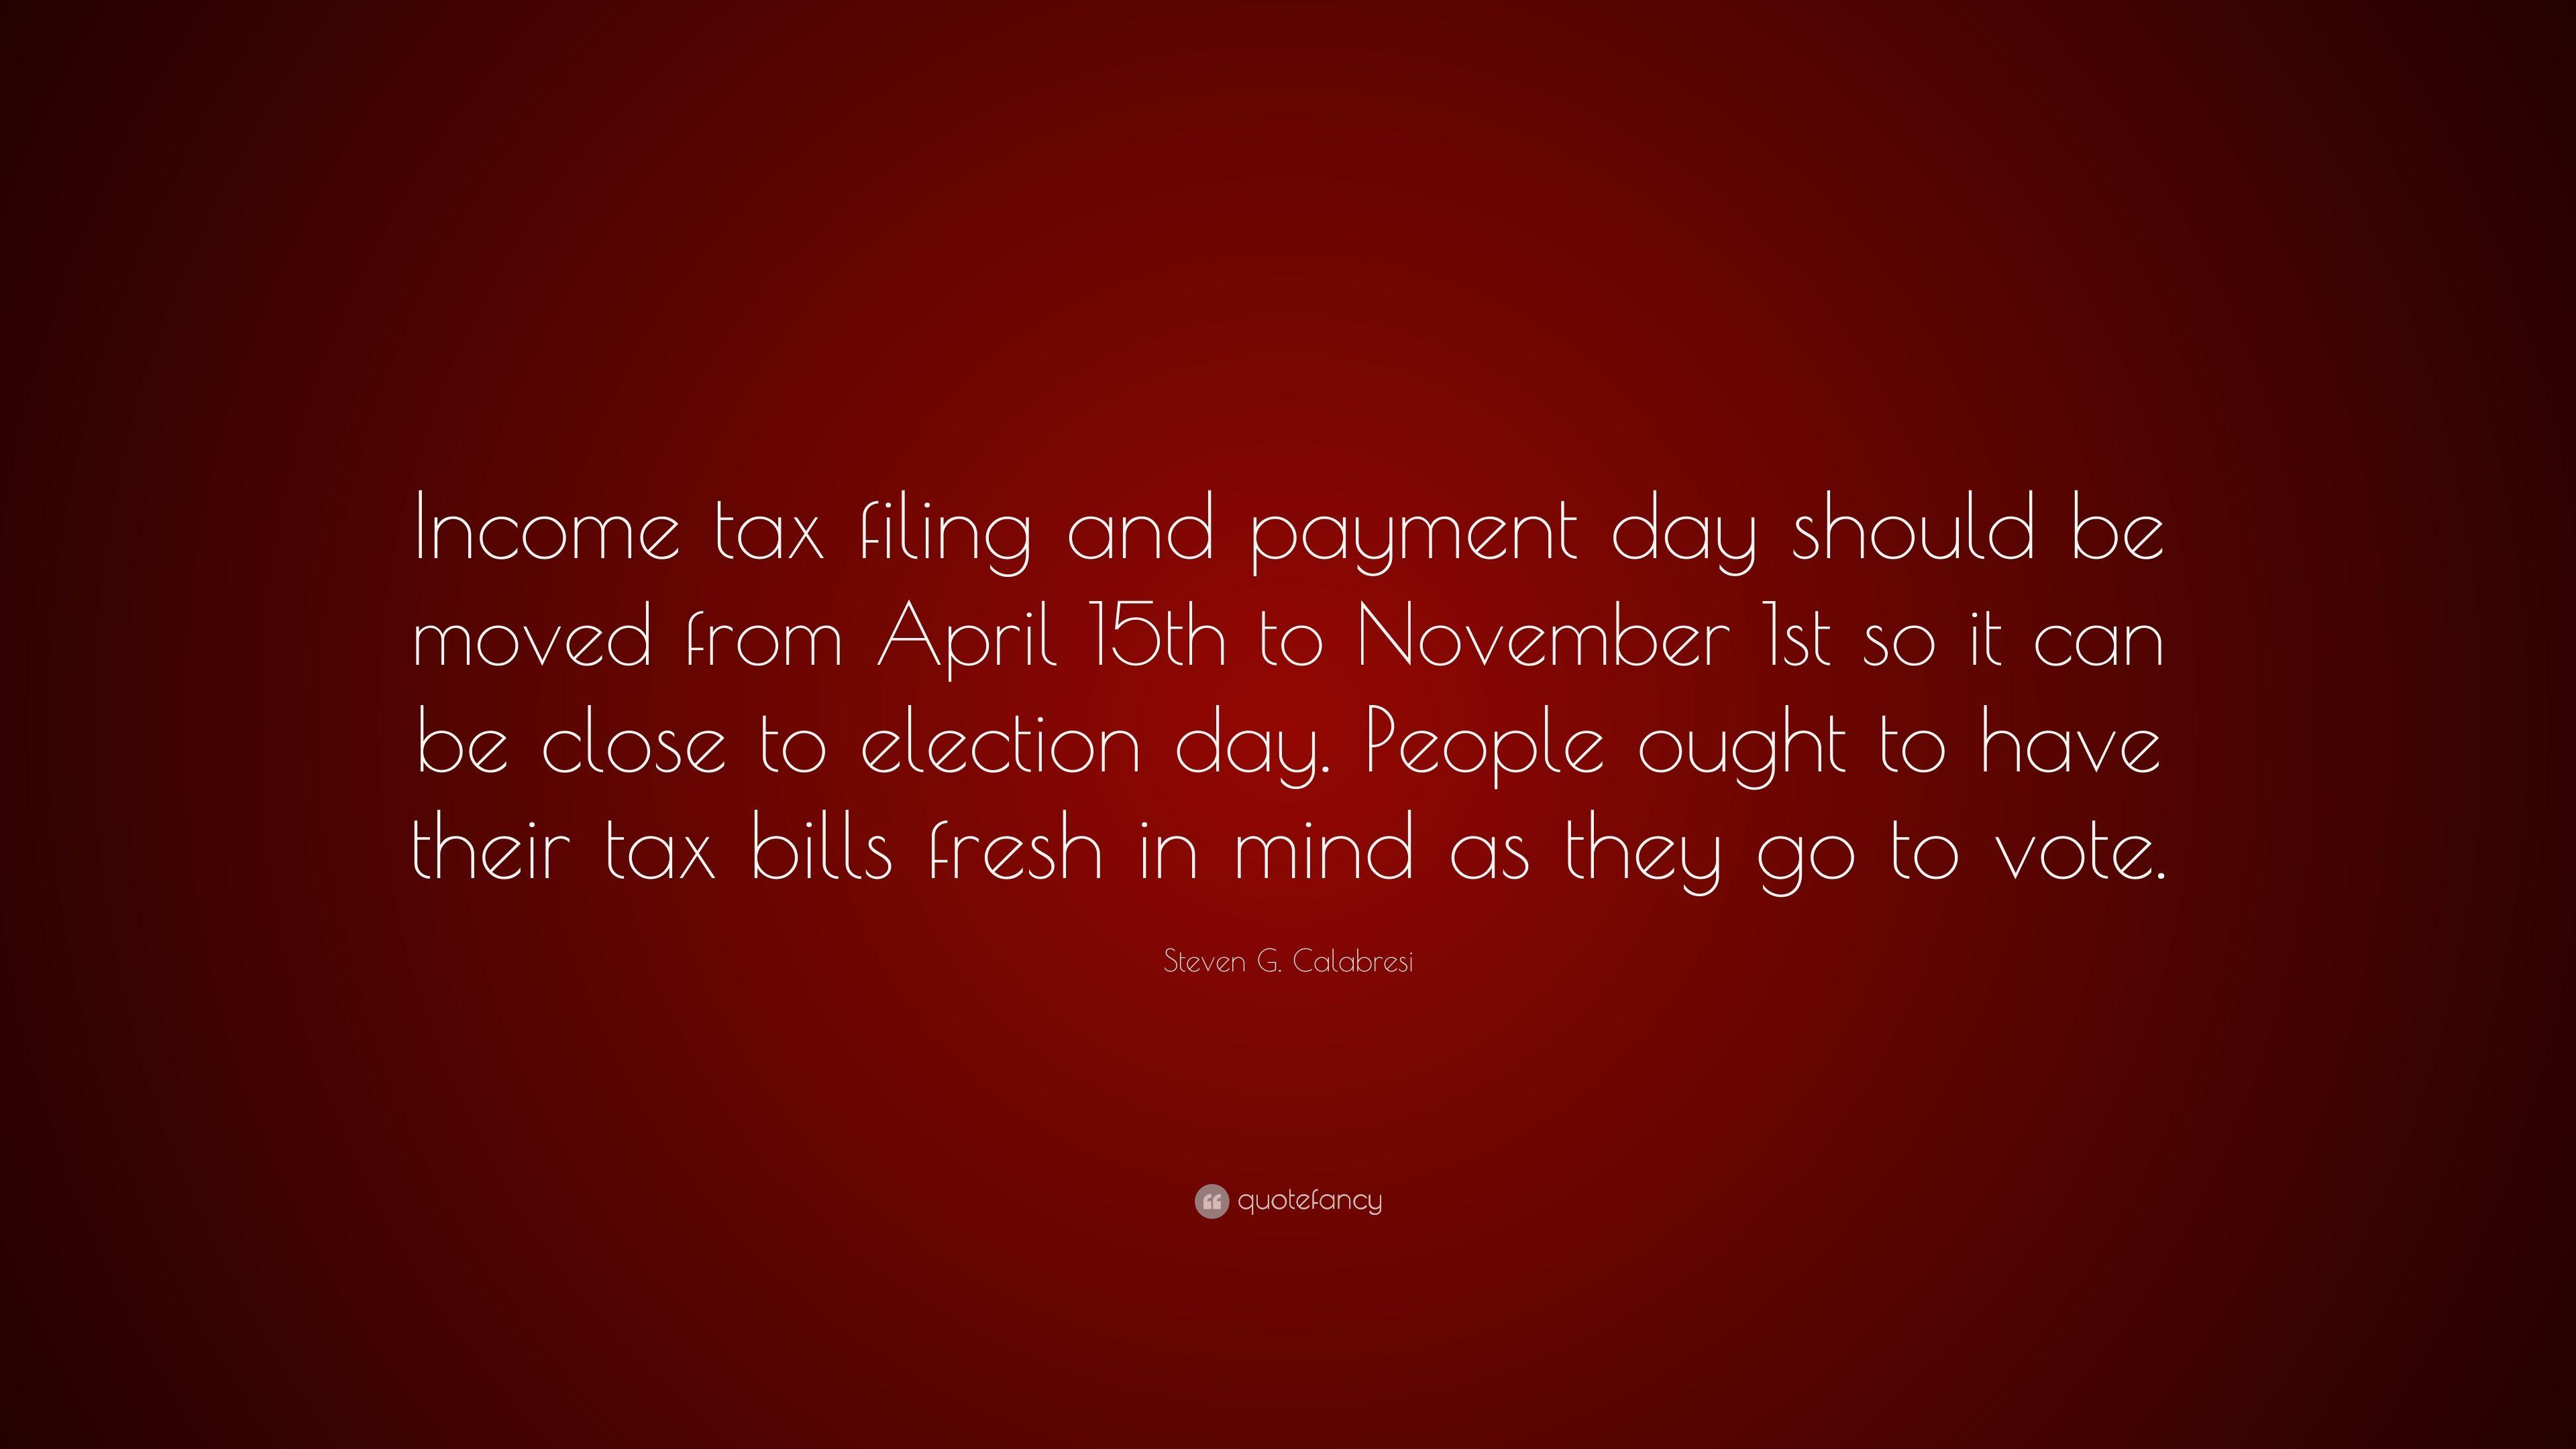 Steven G. Calabresi Quote: “Income tax filing and payment day